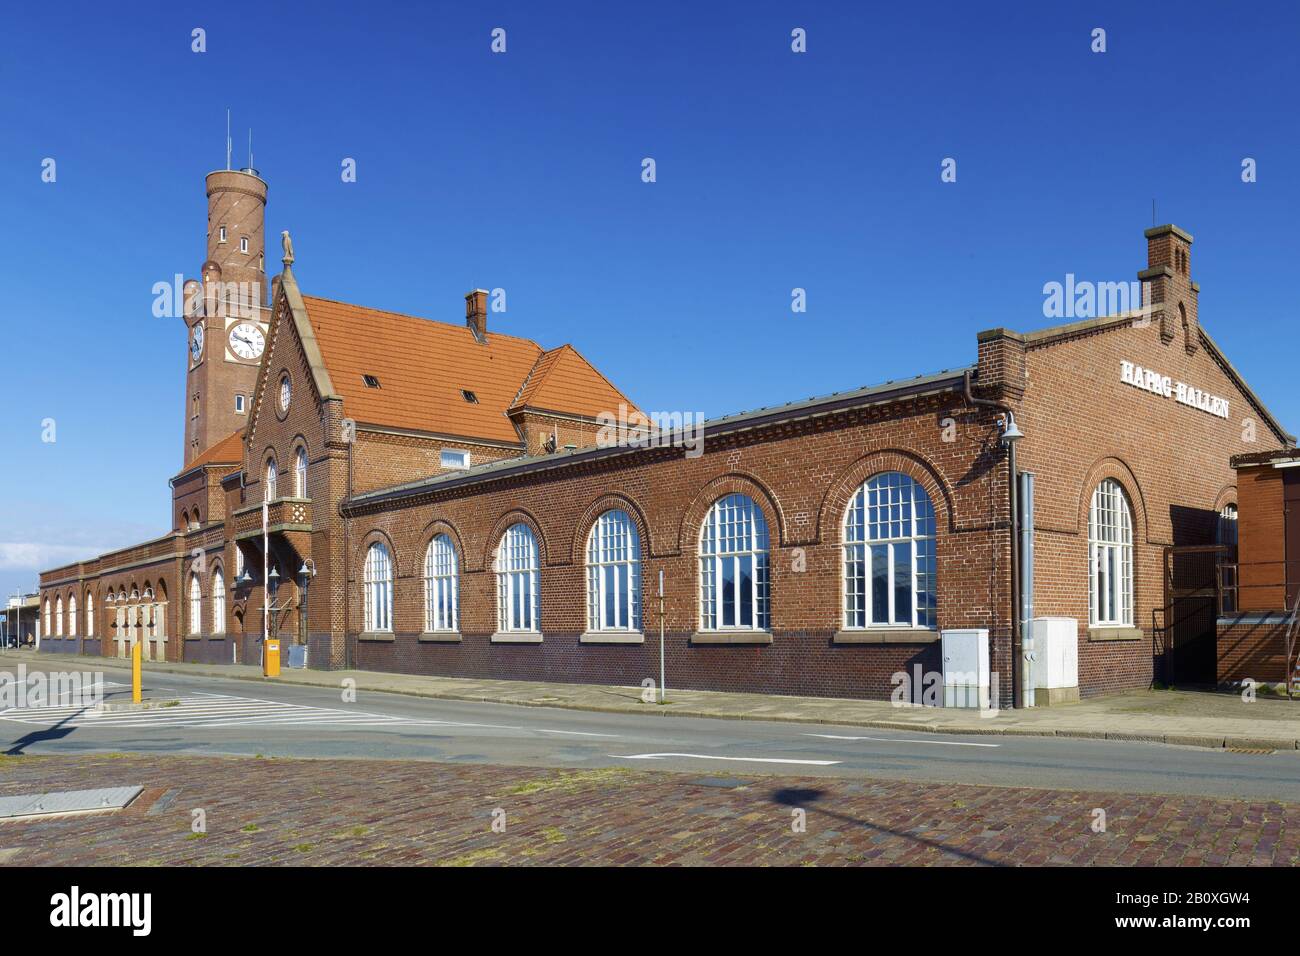 The Steubenhöft with the Hapag halls, Cuxhaven, Lower Saxony, Germany, Stock Photo